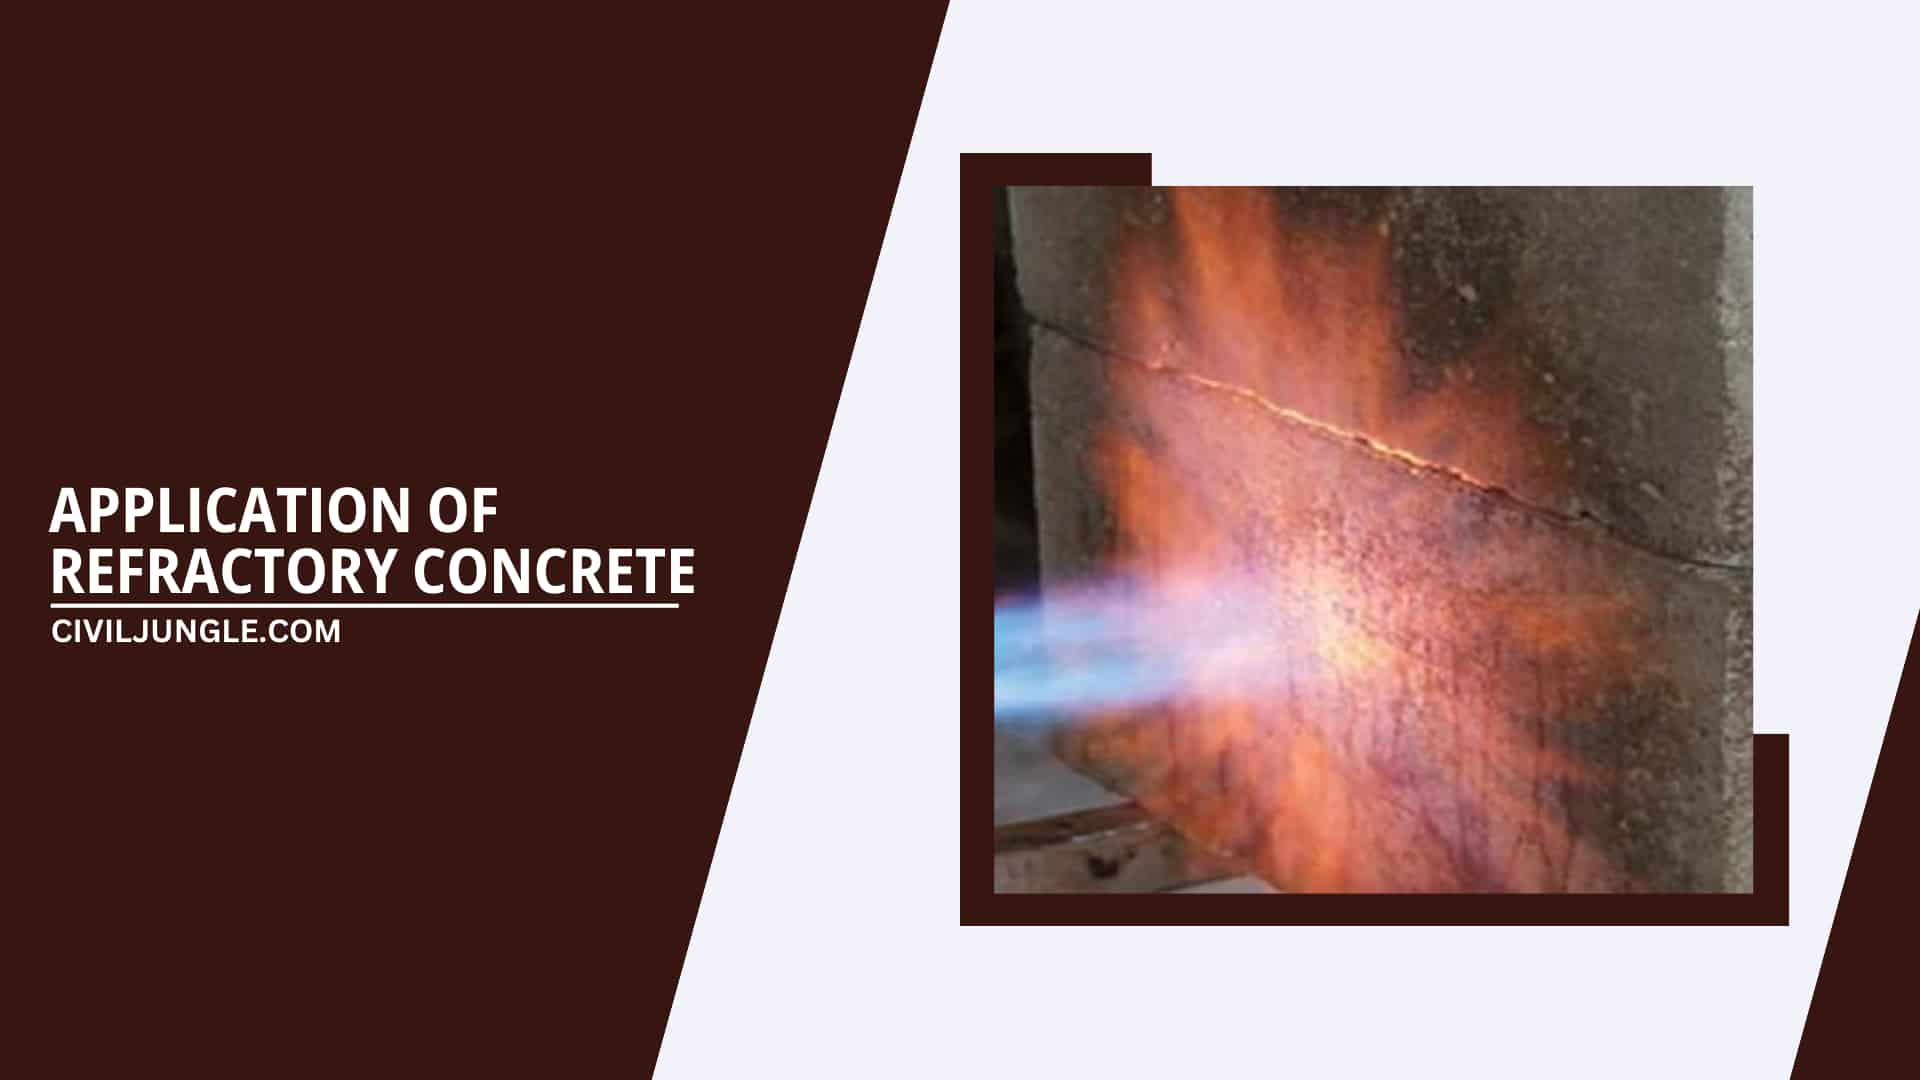 Application of Refractory Concrete